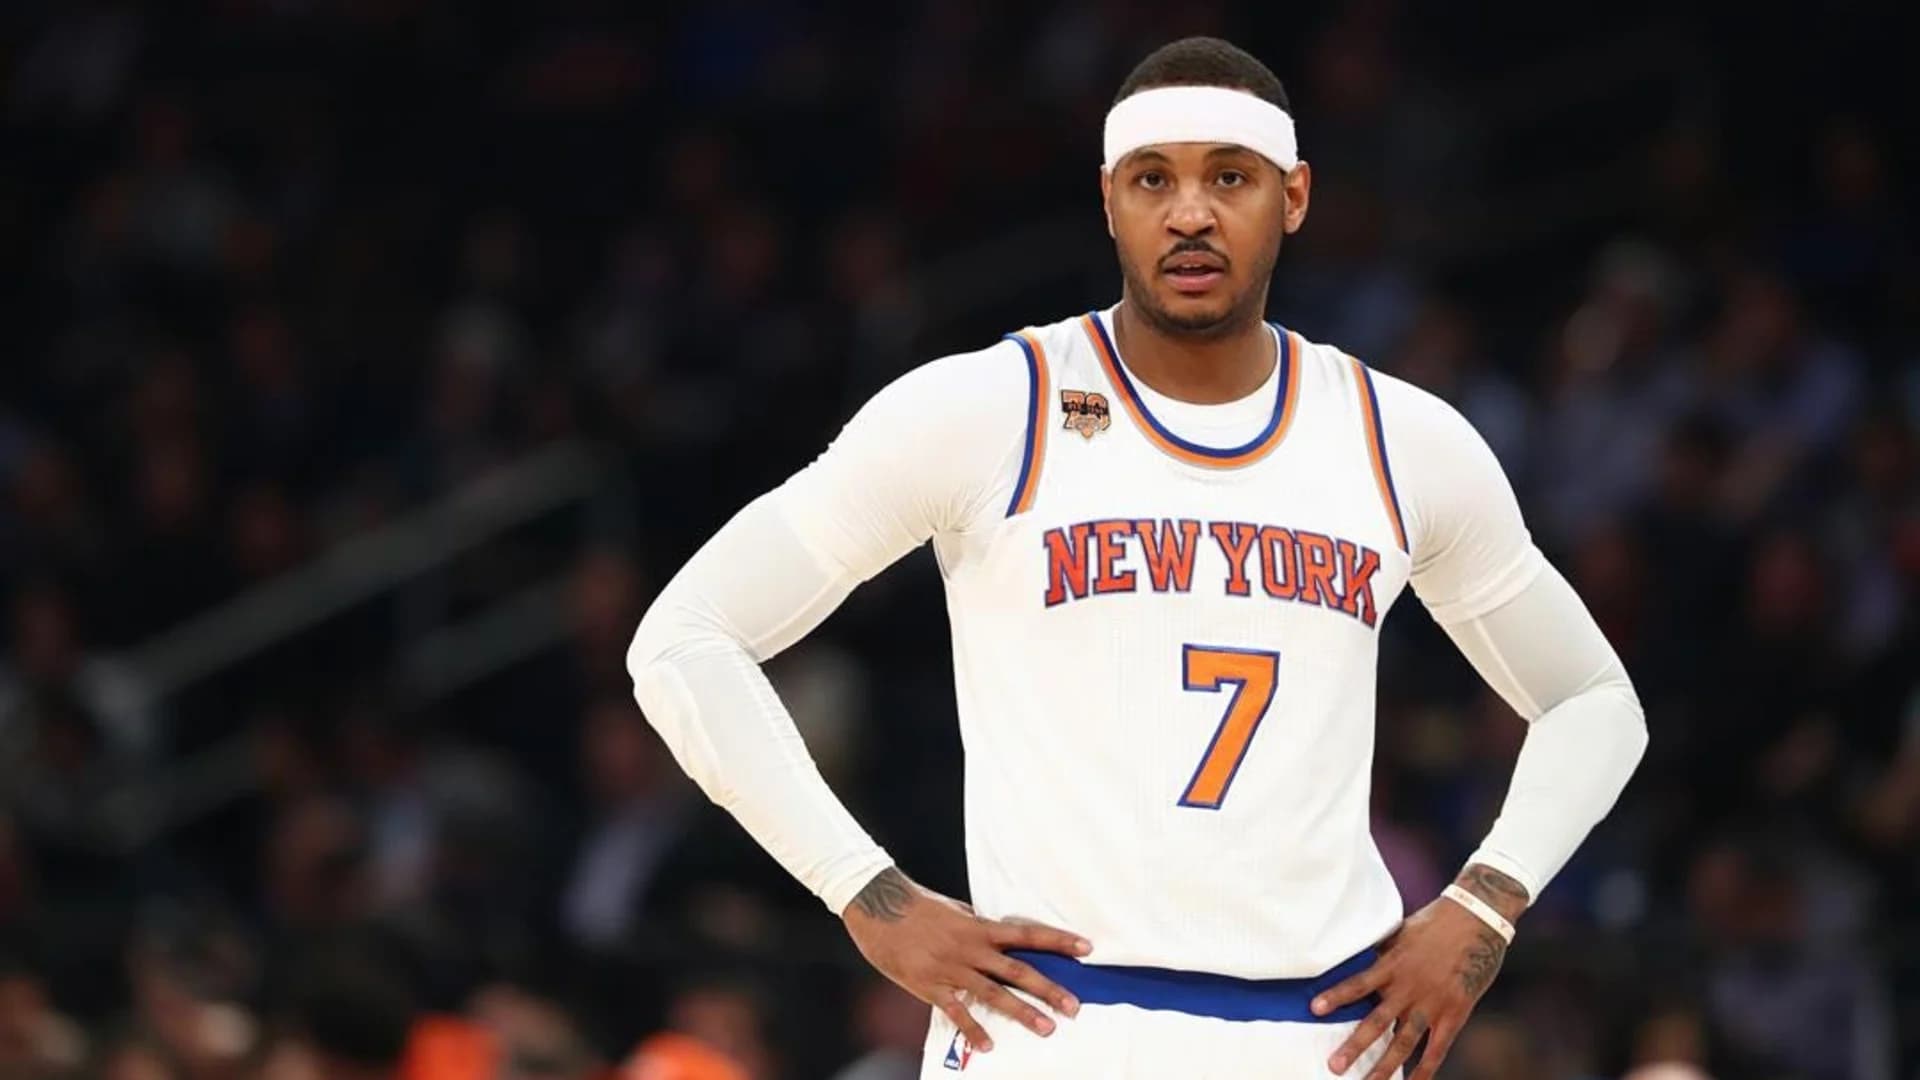 AP source: Knicks agree to trade Carmelo Anthony to Thunder